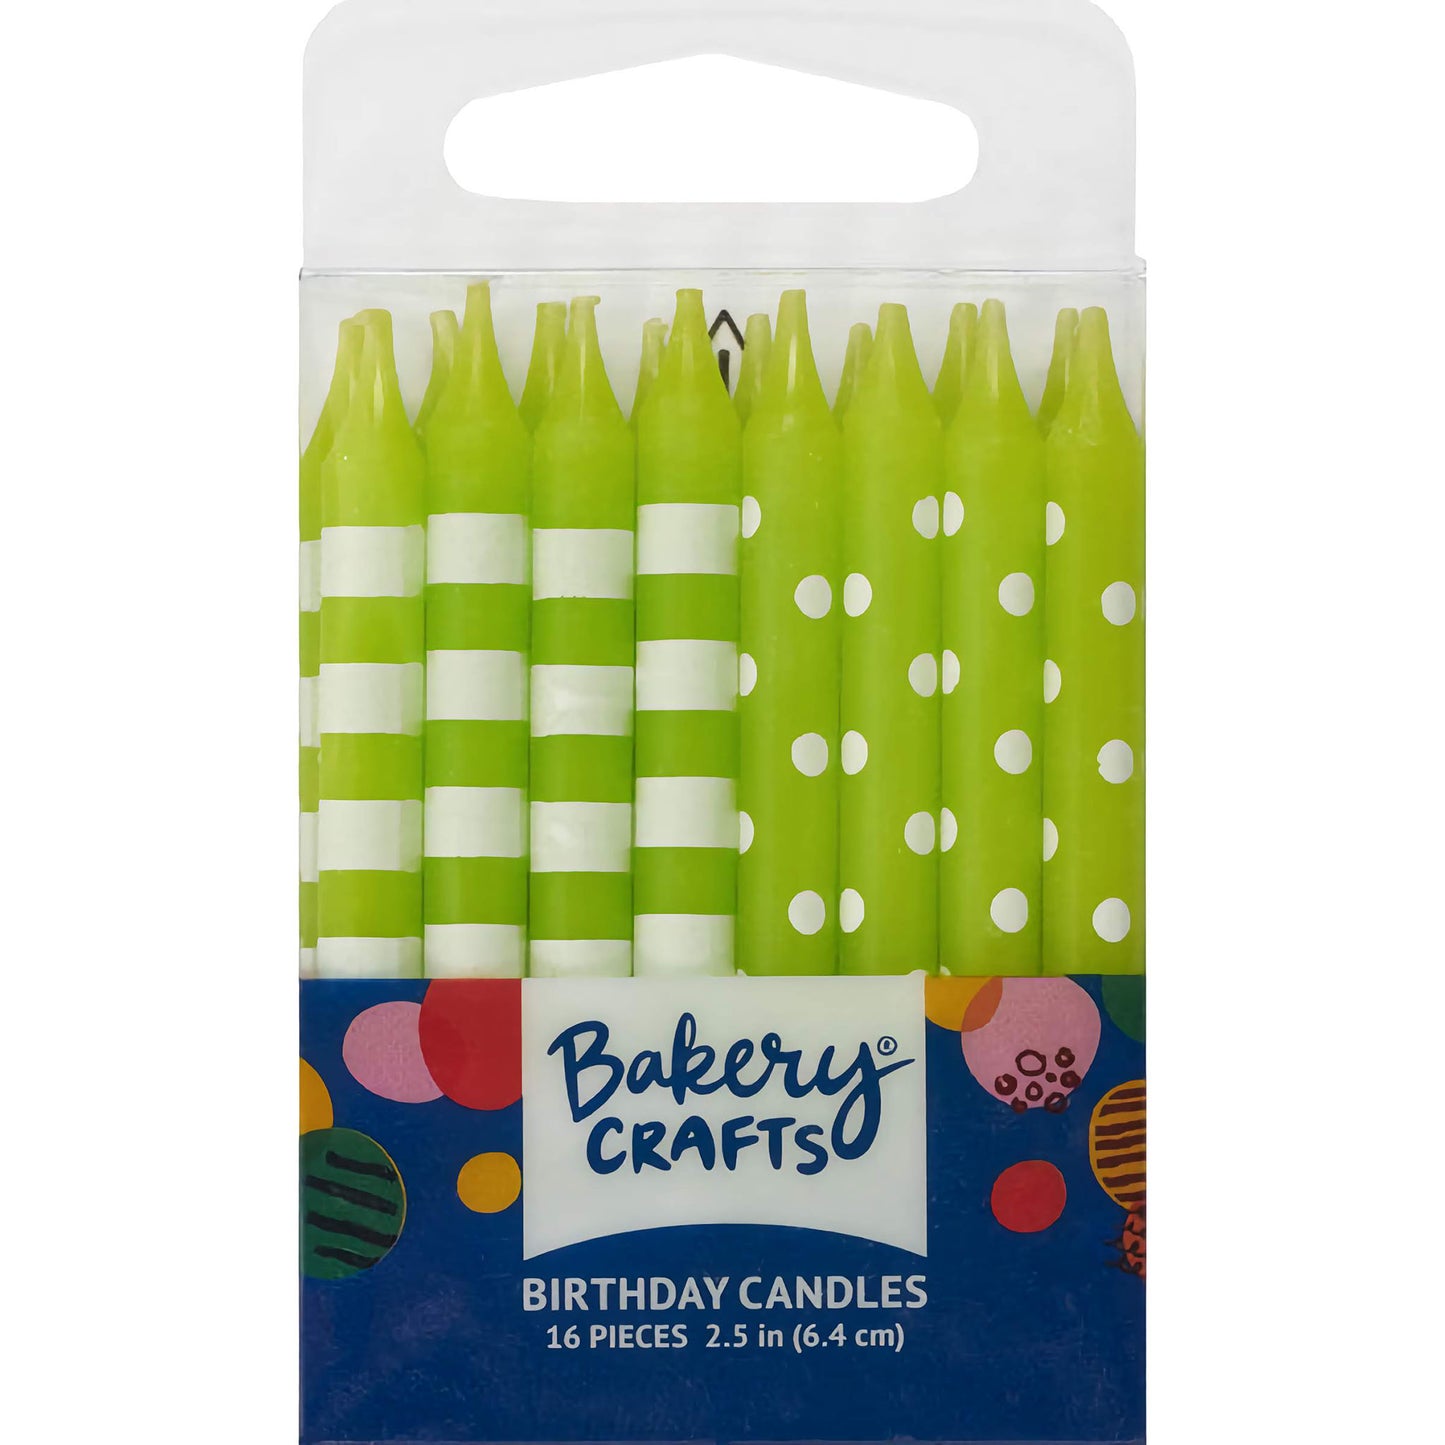 Lime Green Stripes & Dots Birthday Candles - 16 Pack, featuring candles in lime green with white stripes and polka dots, perfect for adding a festive touch to any birthday celebration.